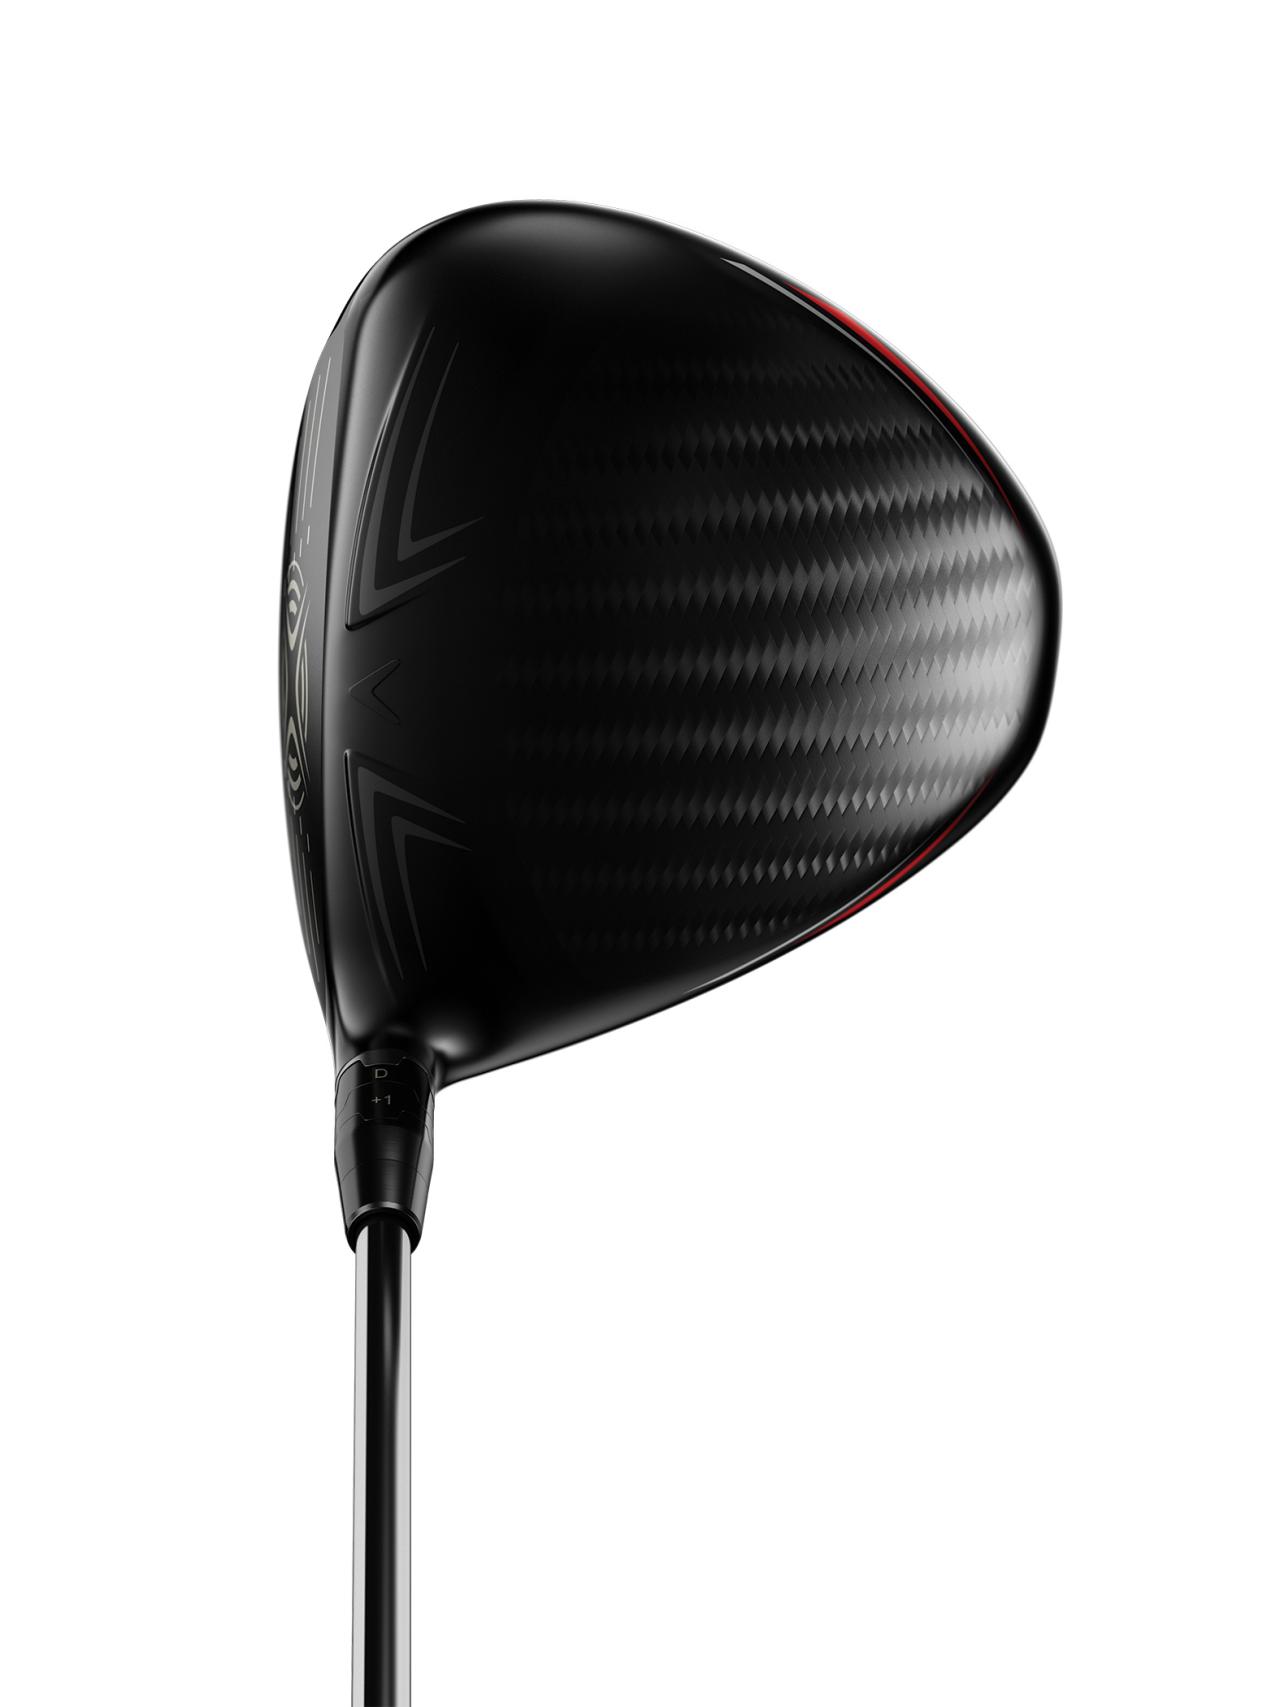 Callaway's Big Bertha Fusion goes all in on forgiveness | This is